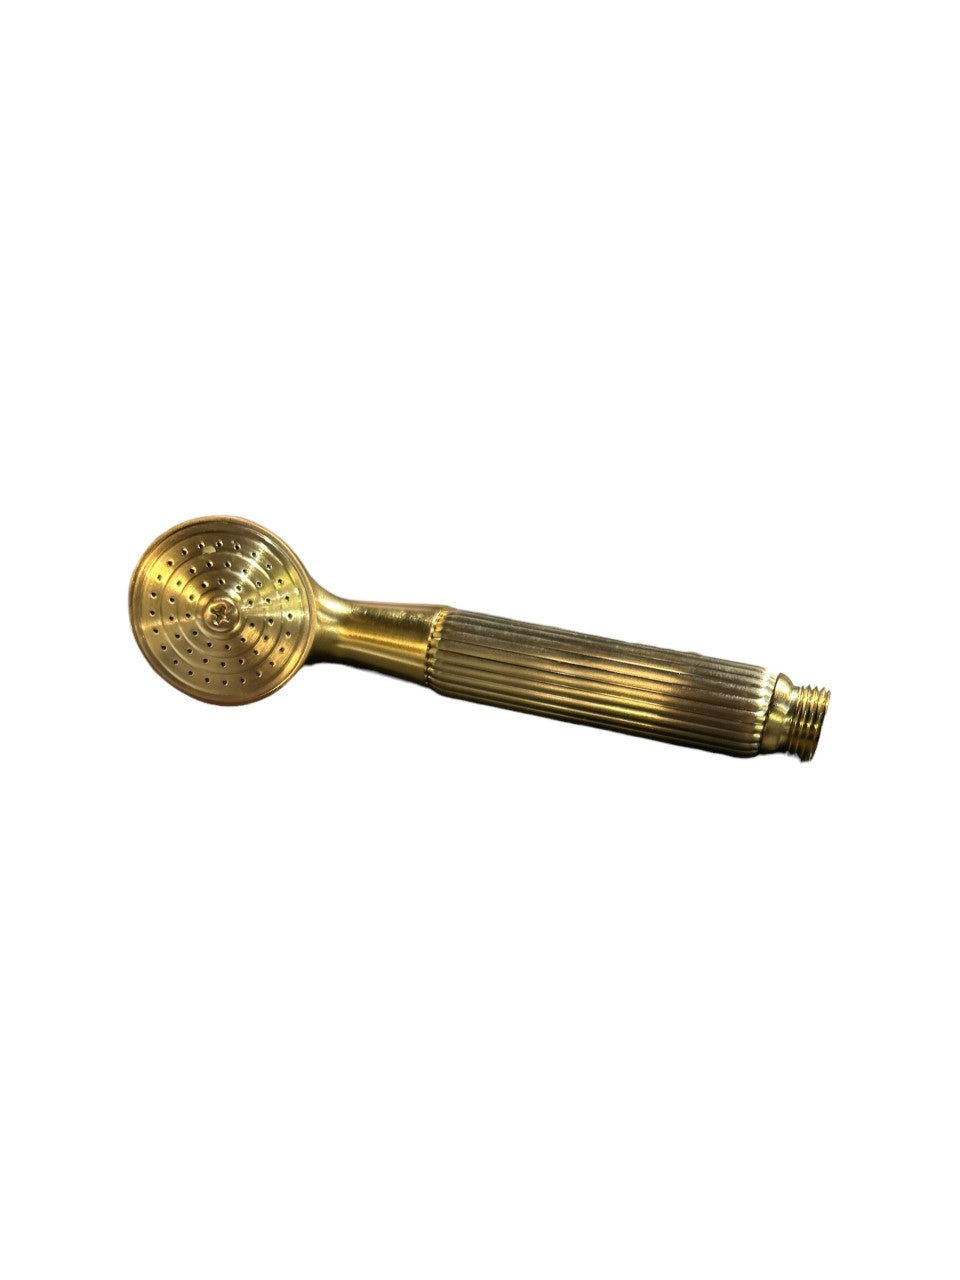 Newport Brass 280/10 Solid Brass Single Function Handshower with Grooved Brass Handle Less Hose, Satin Bronze, New in Box - FreemanLiquidators - [product_description]